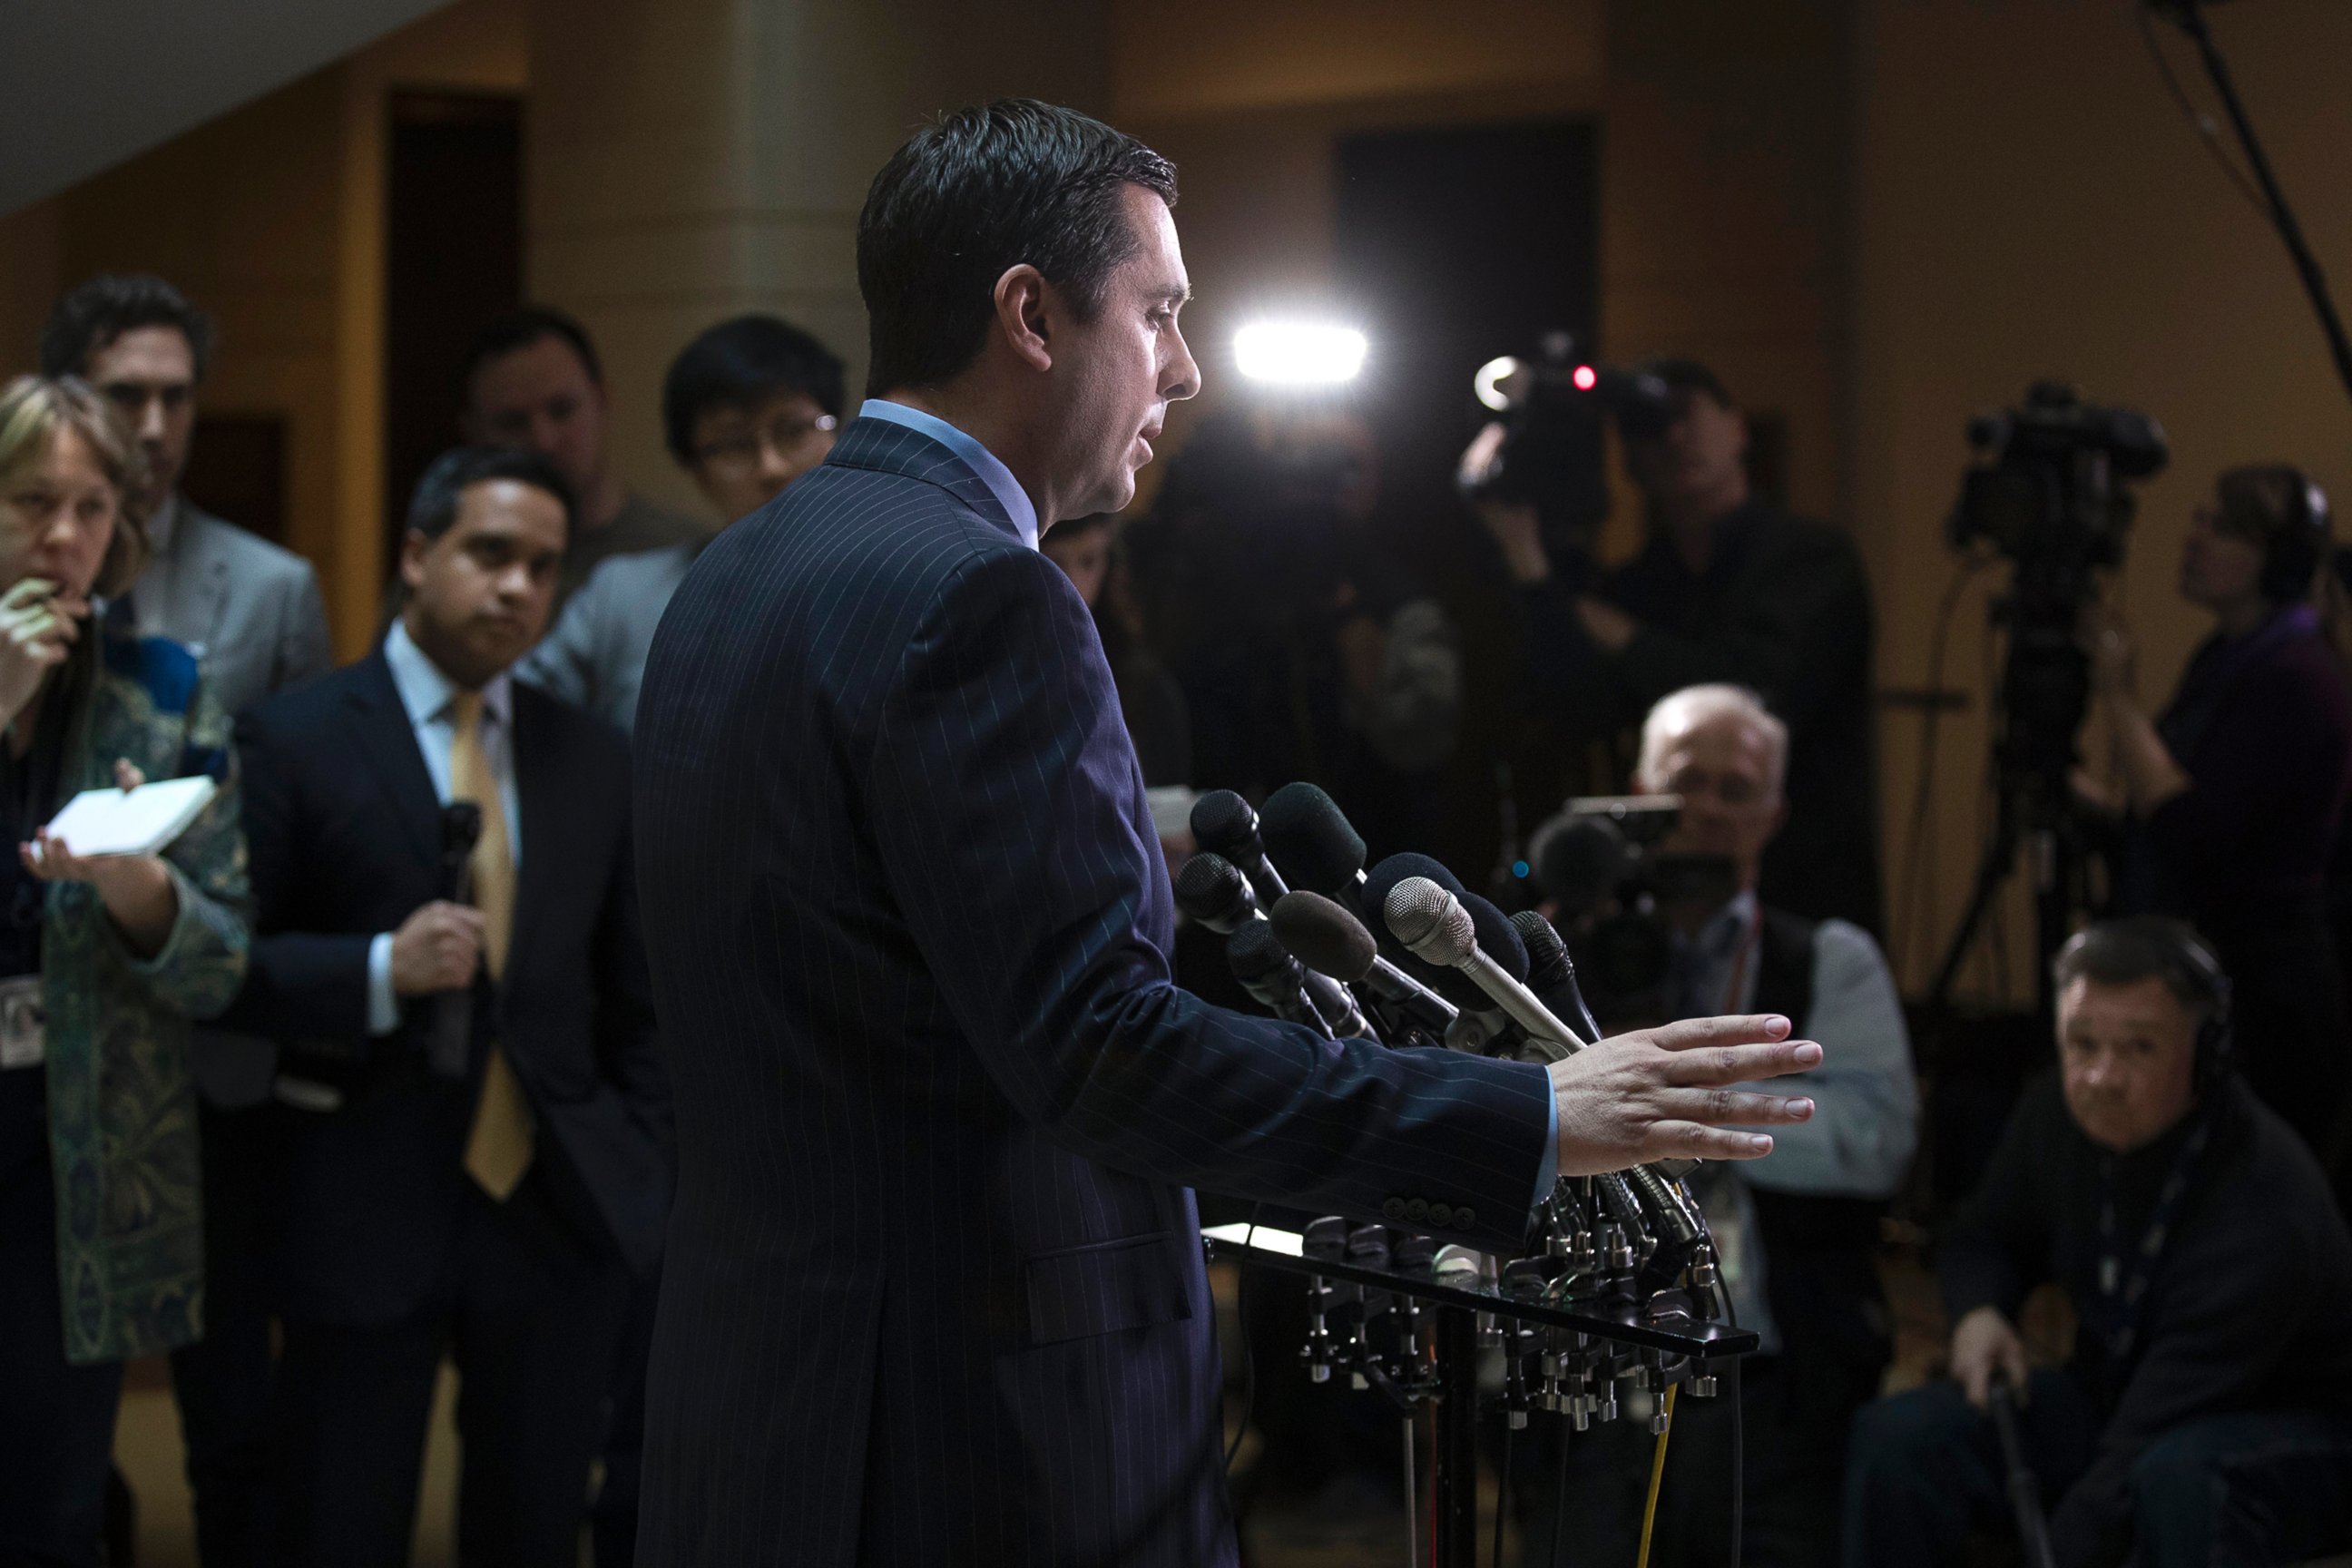 PHOTO: Chairman of the House Permanent Select Committee on Intelligence Devin Nunes answers questions during a press conference on Capitol Hill in Washington, D.C., March 22, 2017